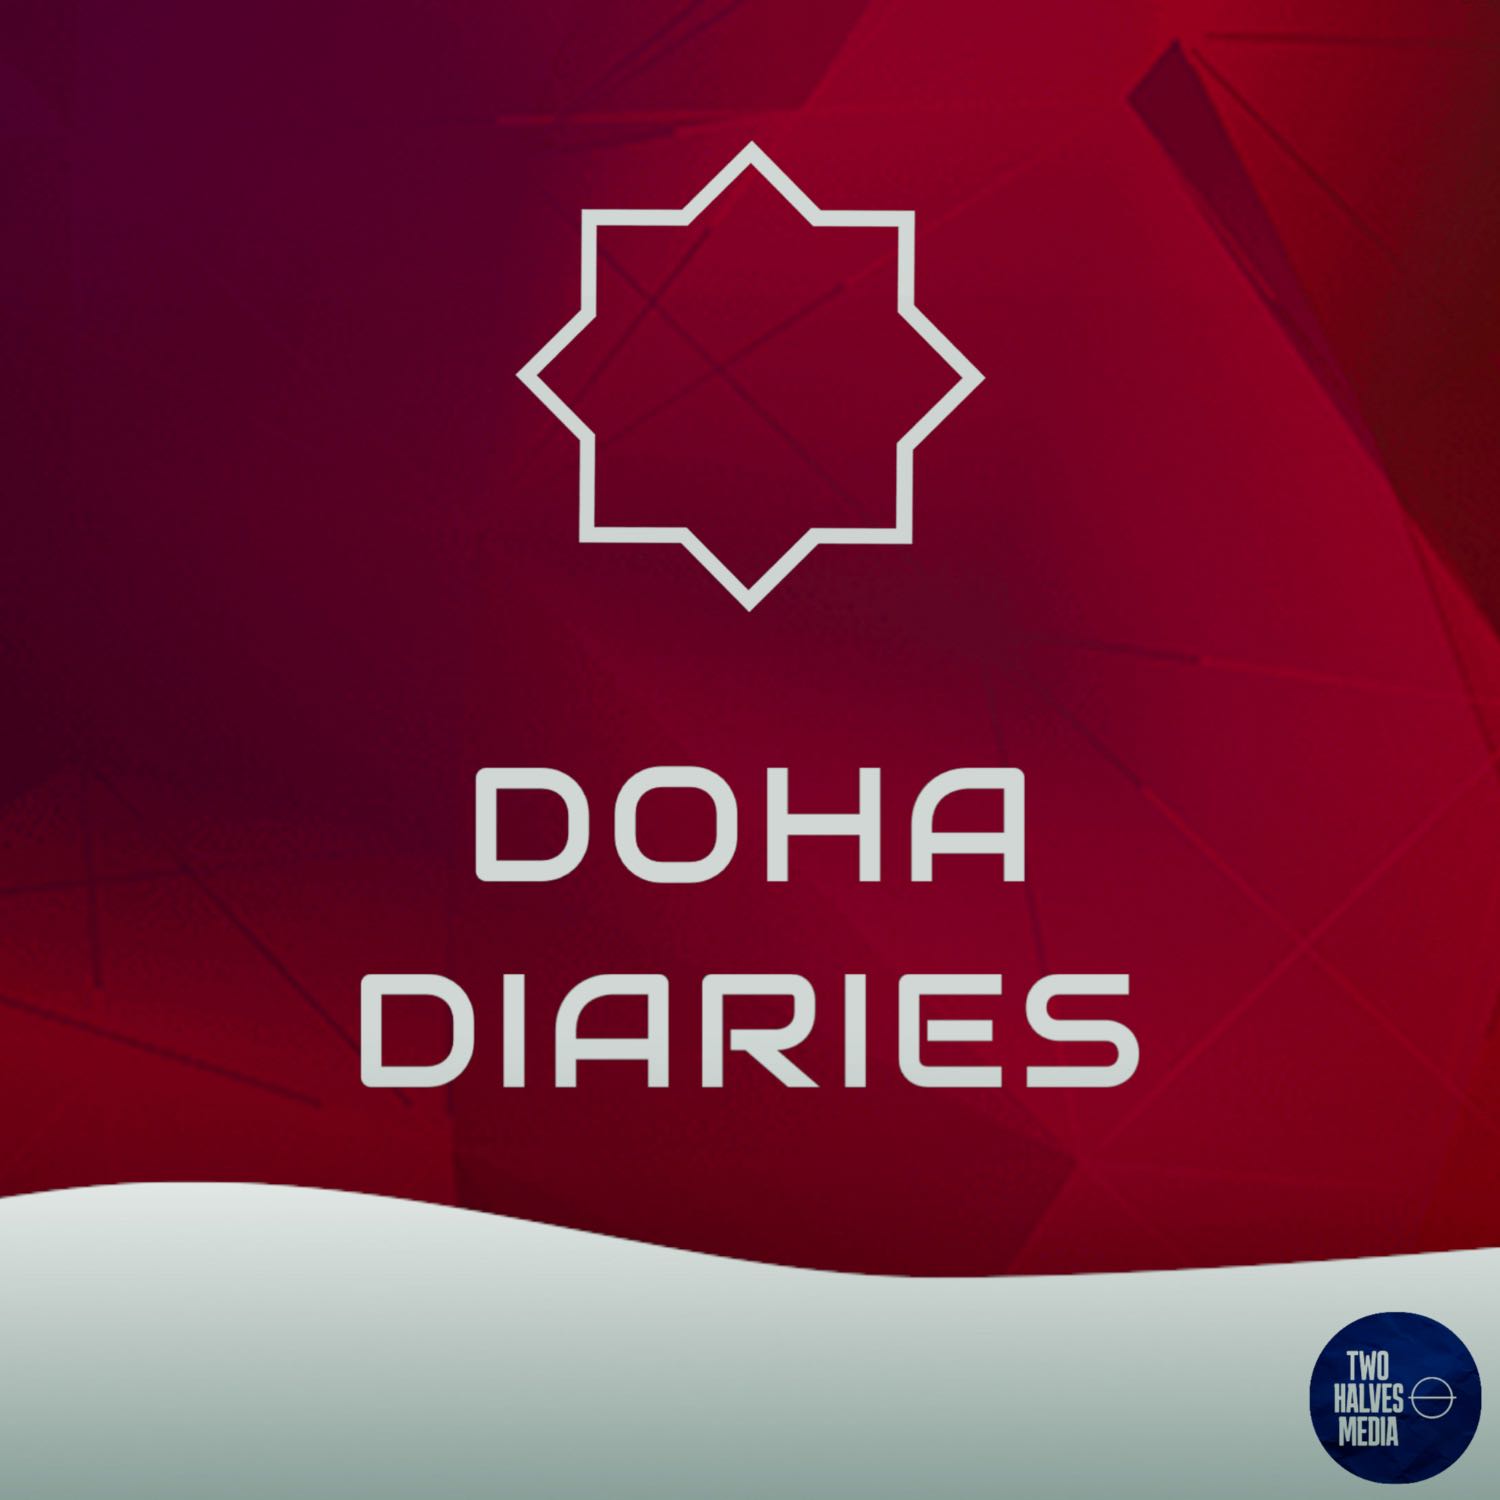 DOHA DIARIES #3- Argentina vs France in the World Cup Final | A Moroccan Miracle | Messi Or Mbappe?